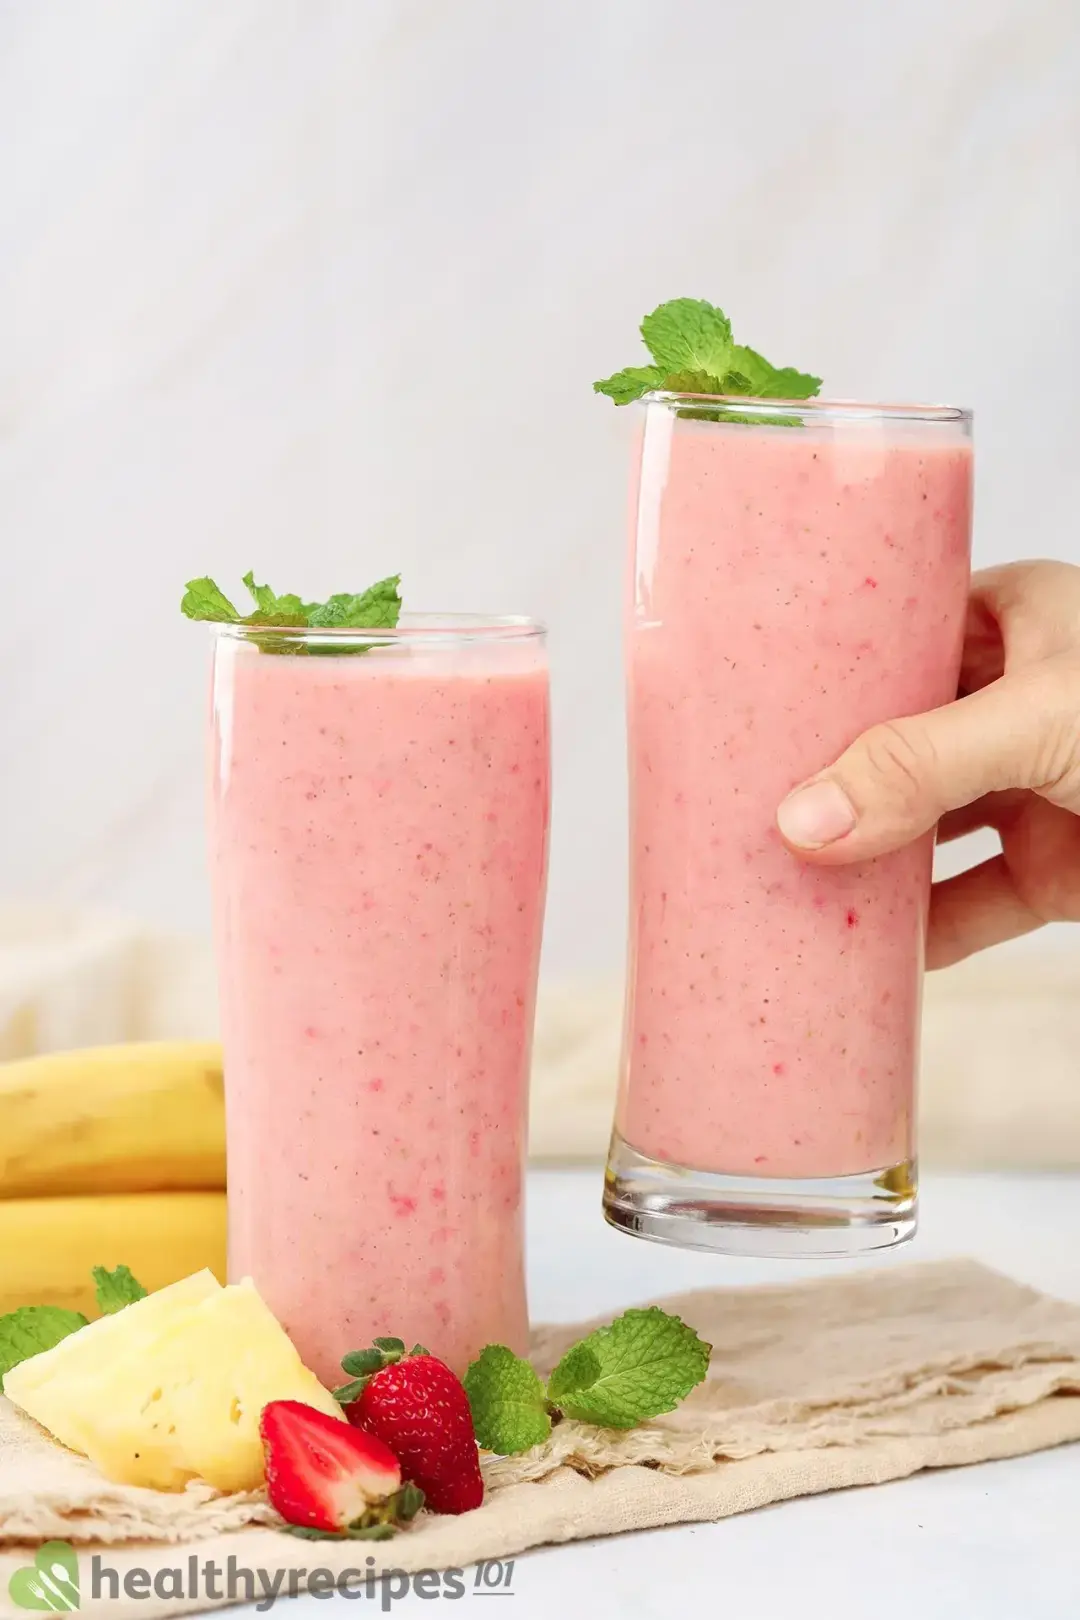 Can You Freeze a Pineapple Strawberry Banana Smoothie